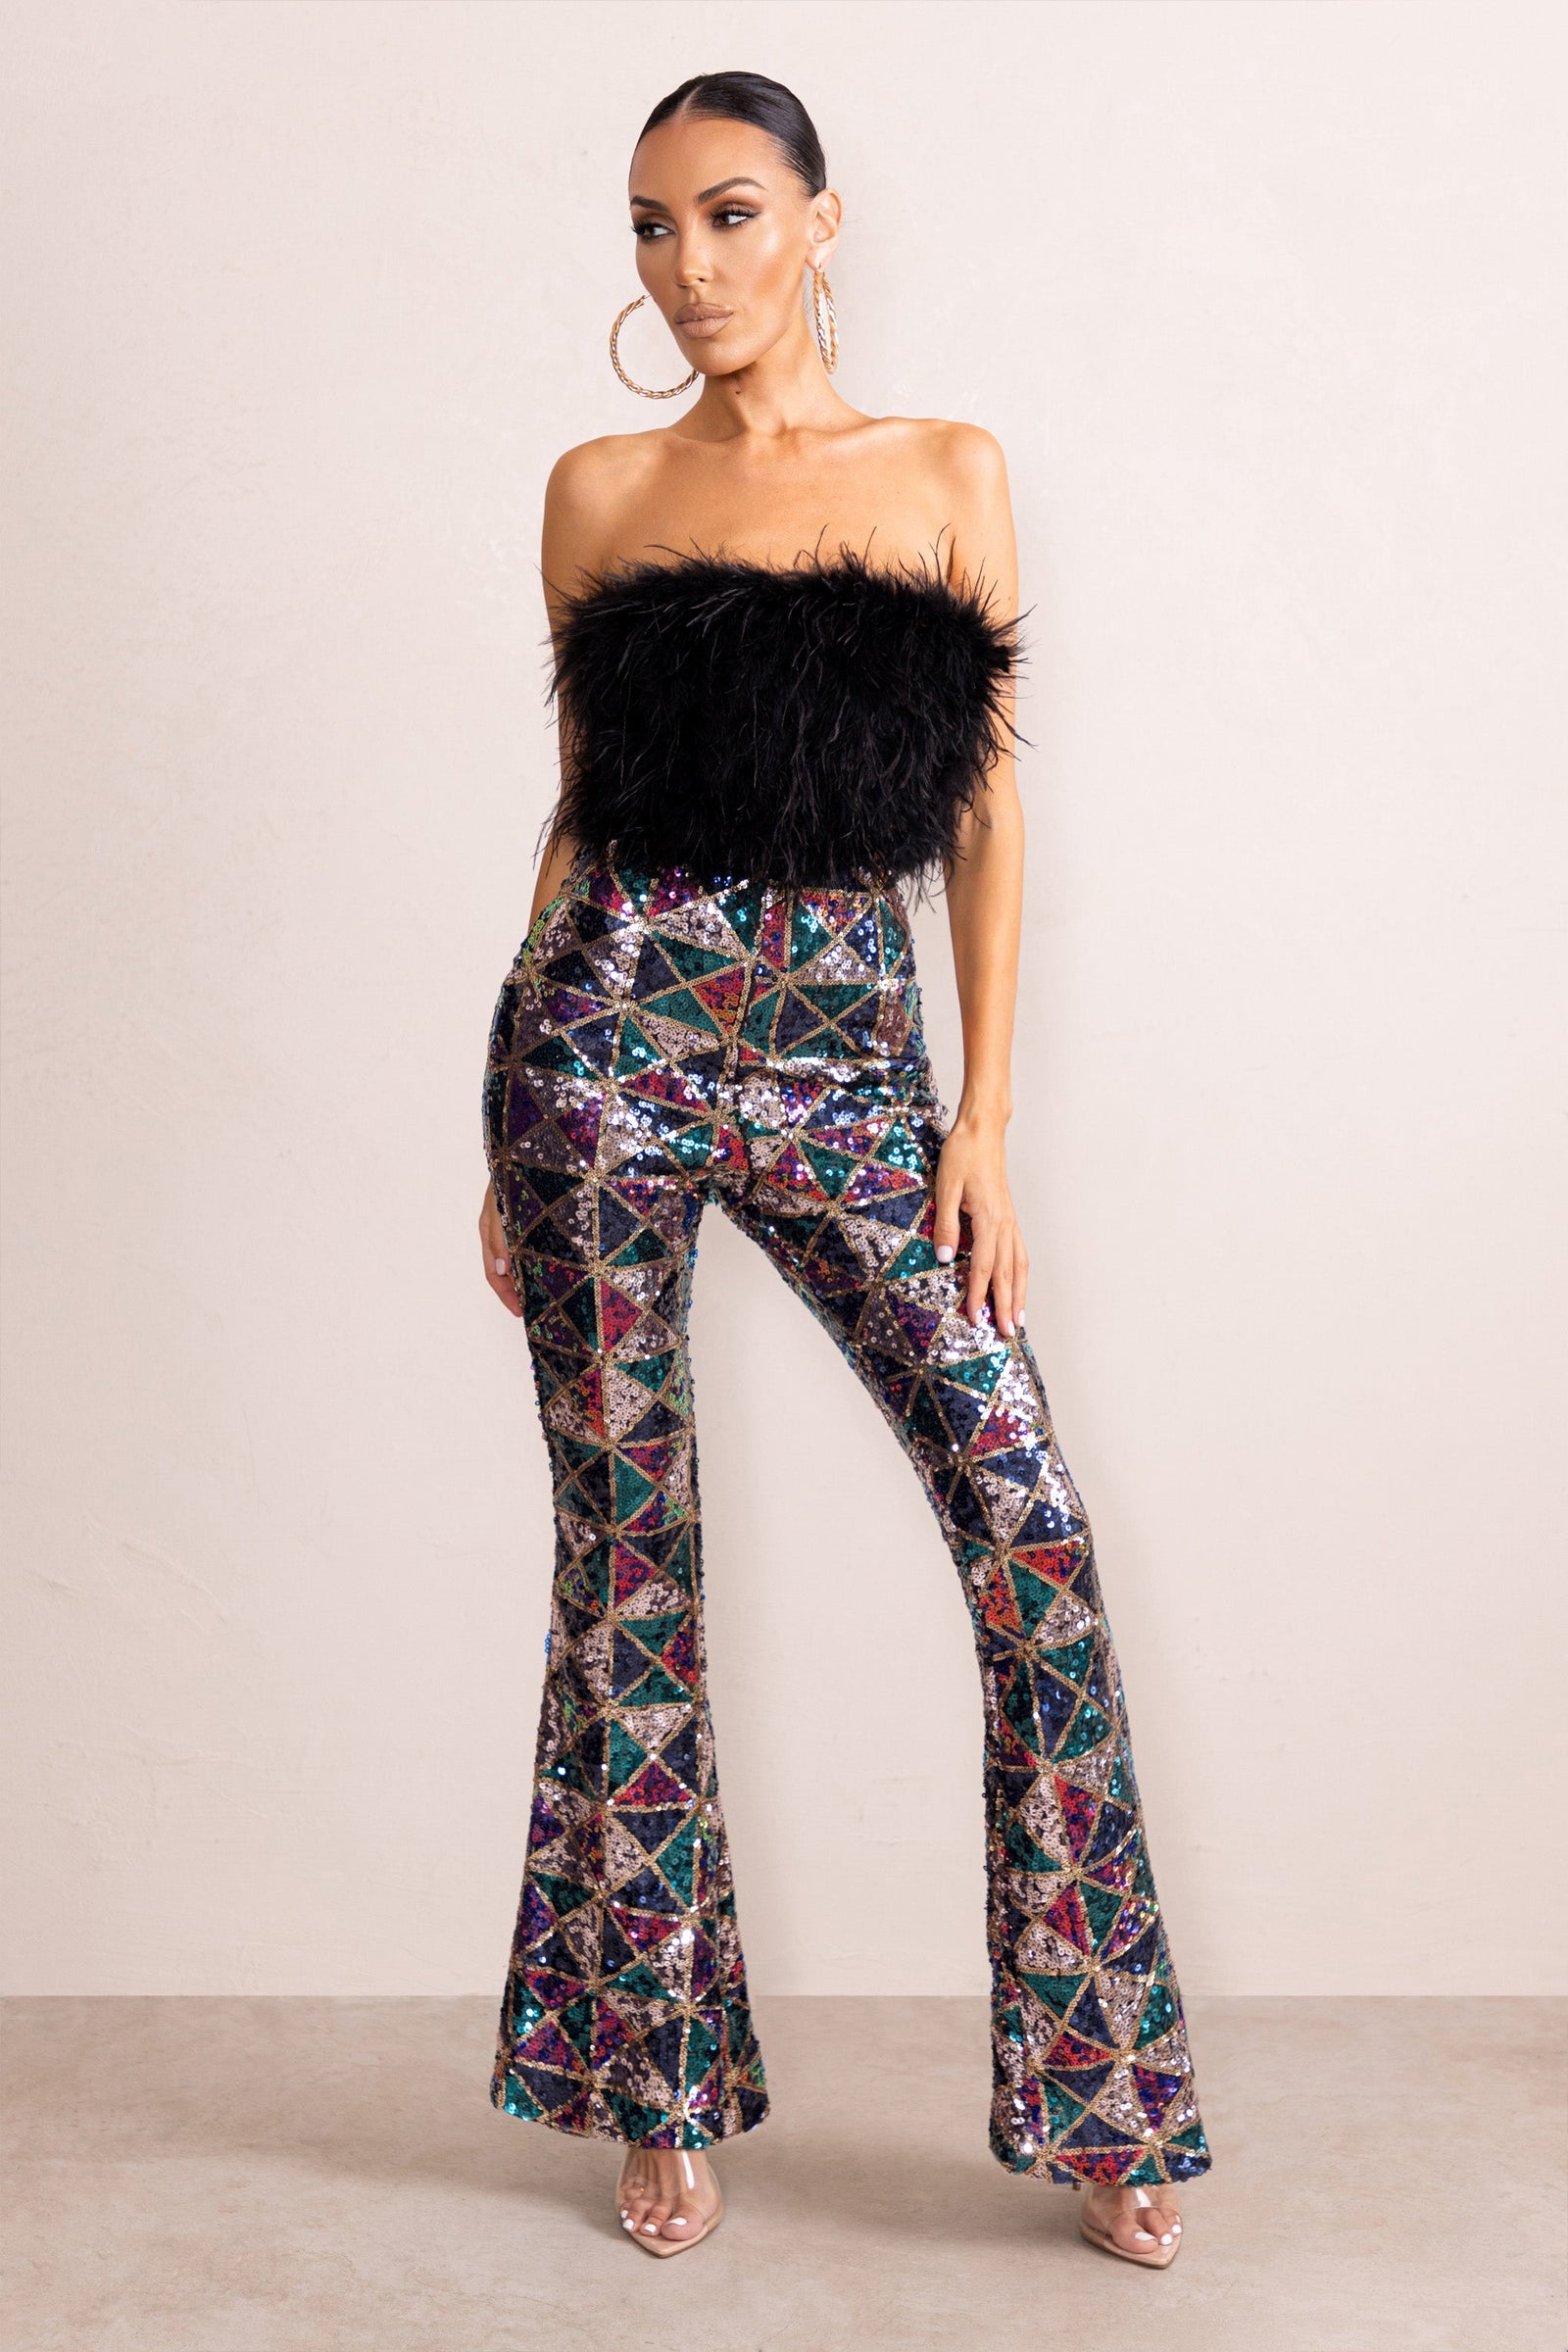 Dropping Hints Champagne Sequin Wide Leg Trousers – Club L London - USA